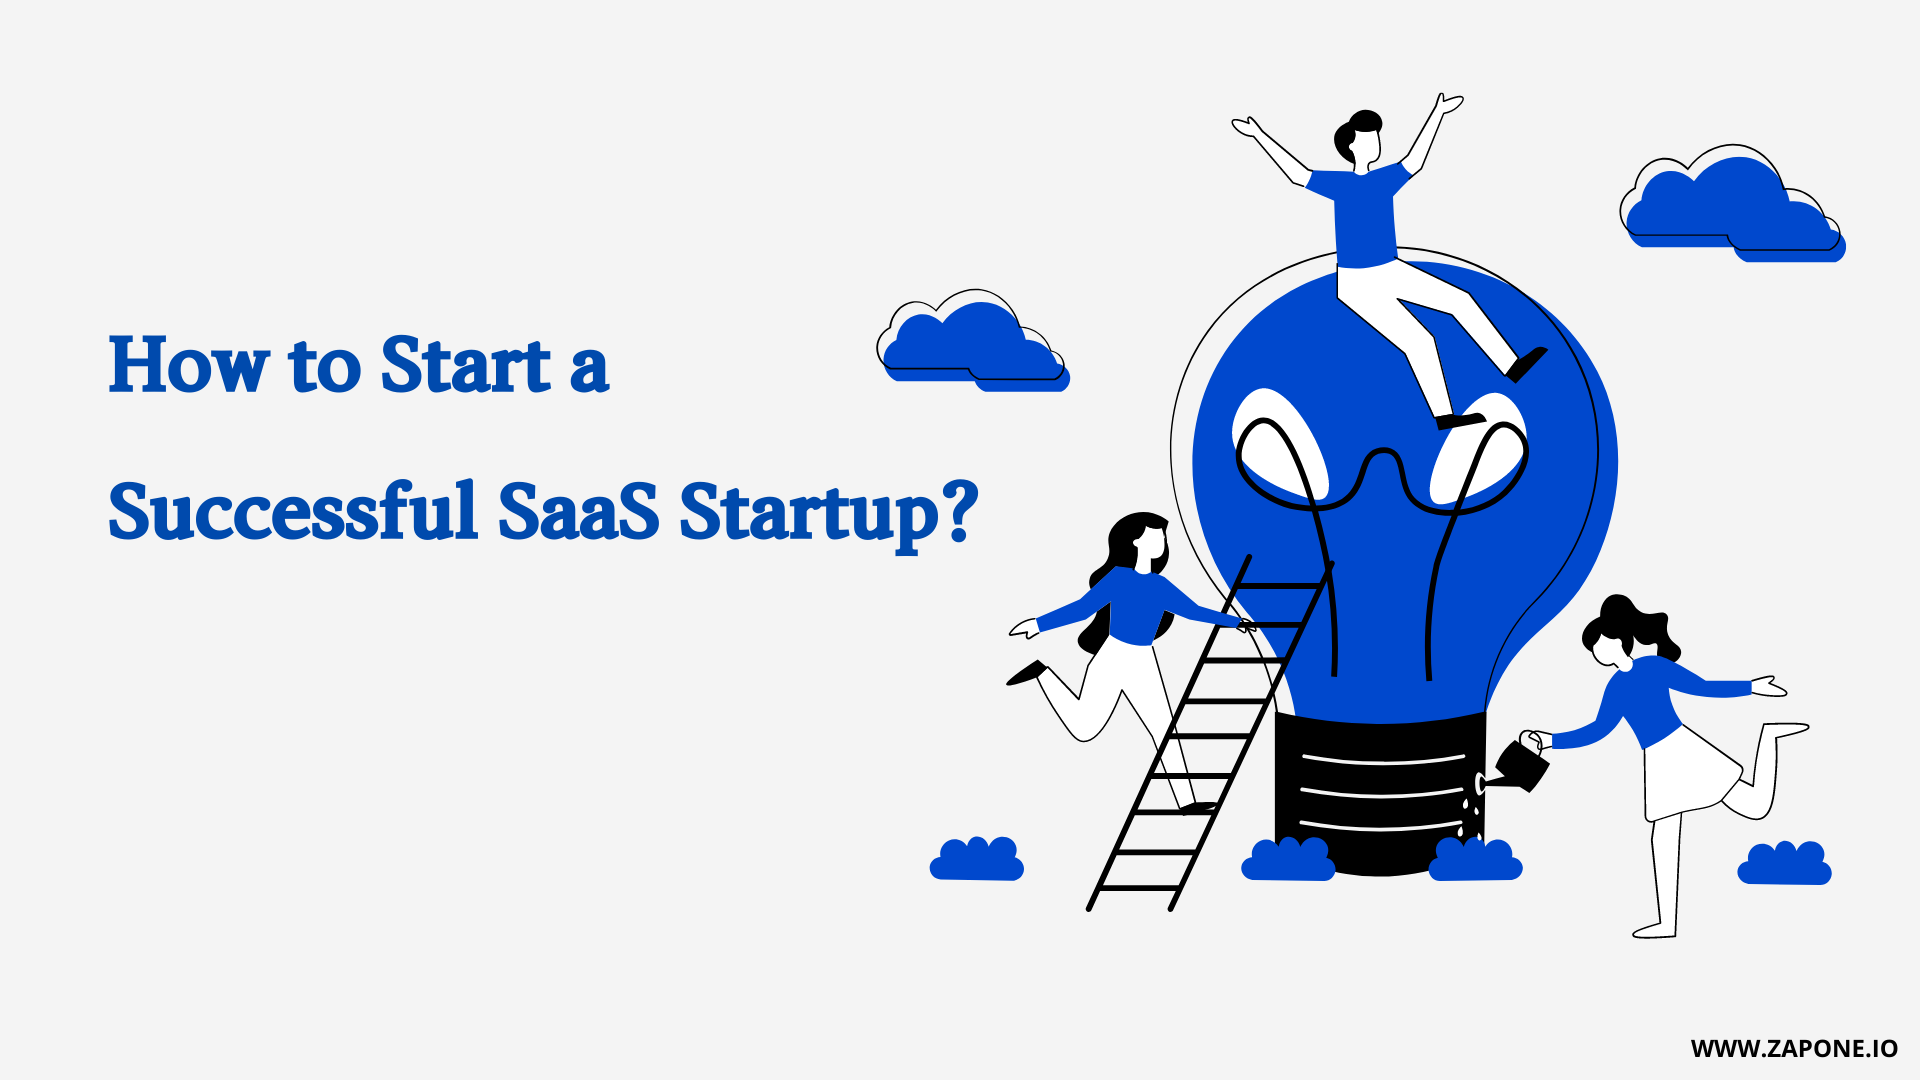 10 Key Drivers of a Successful SaaS Startup you should know